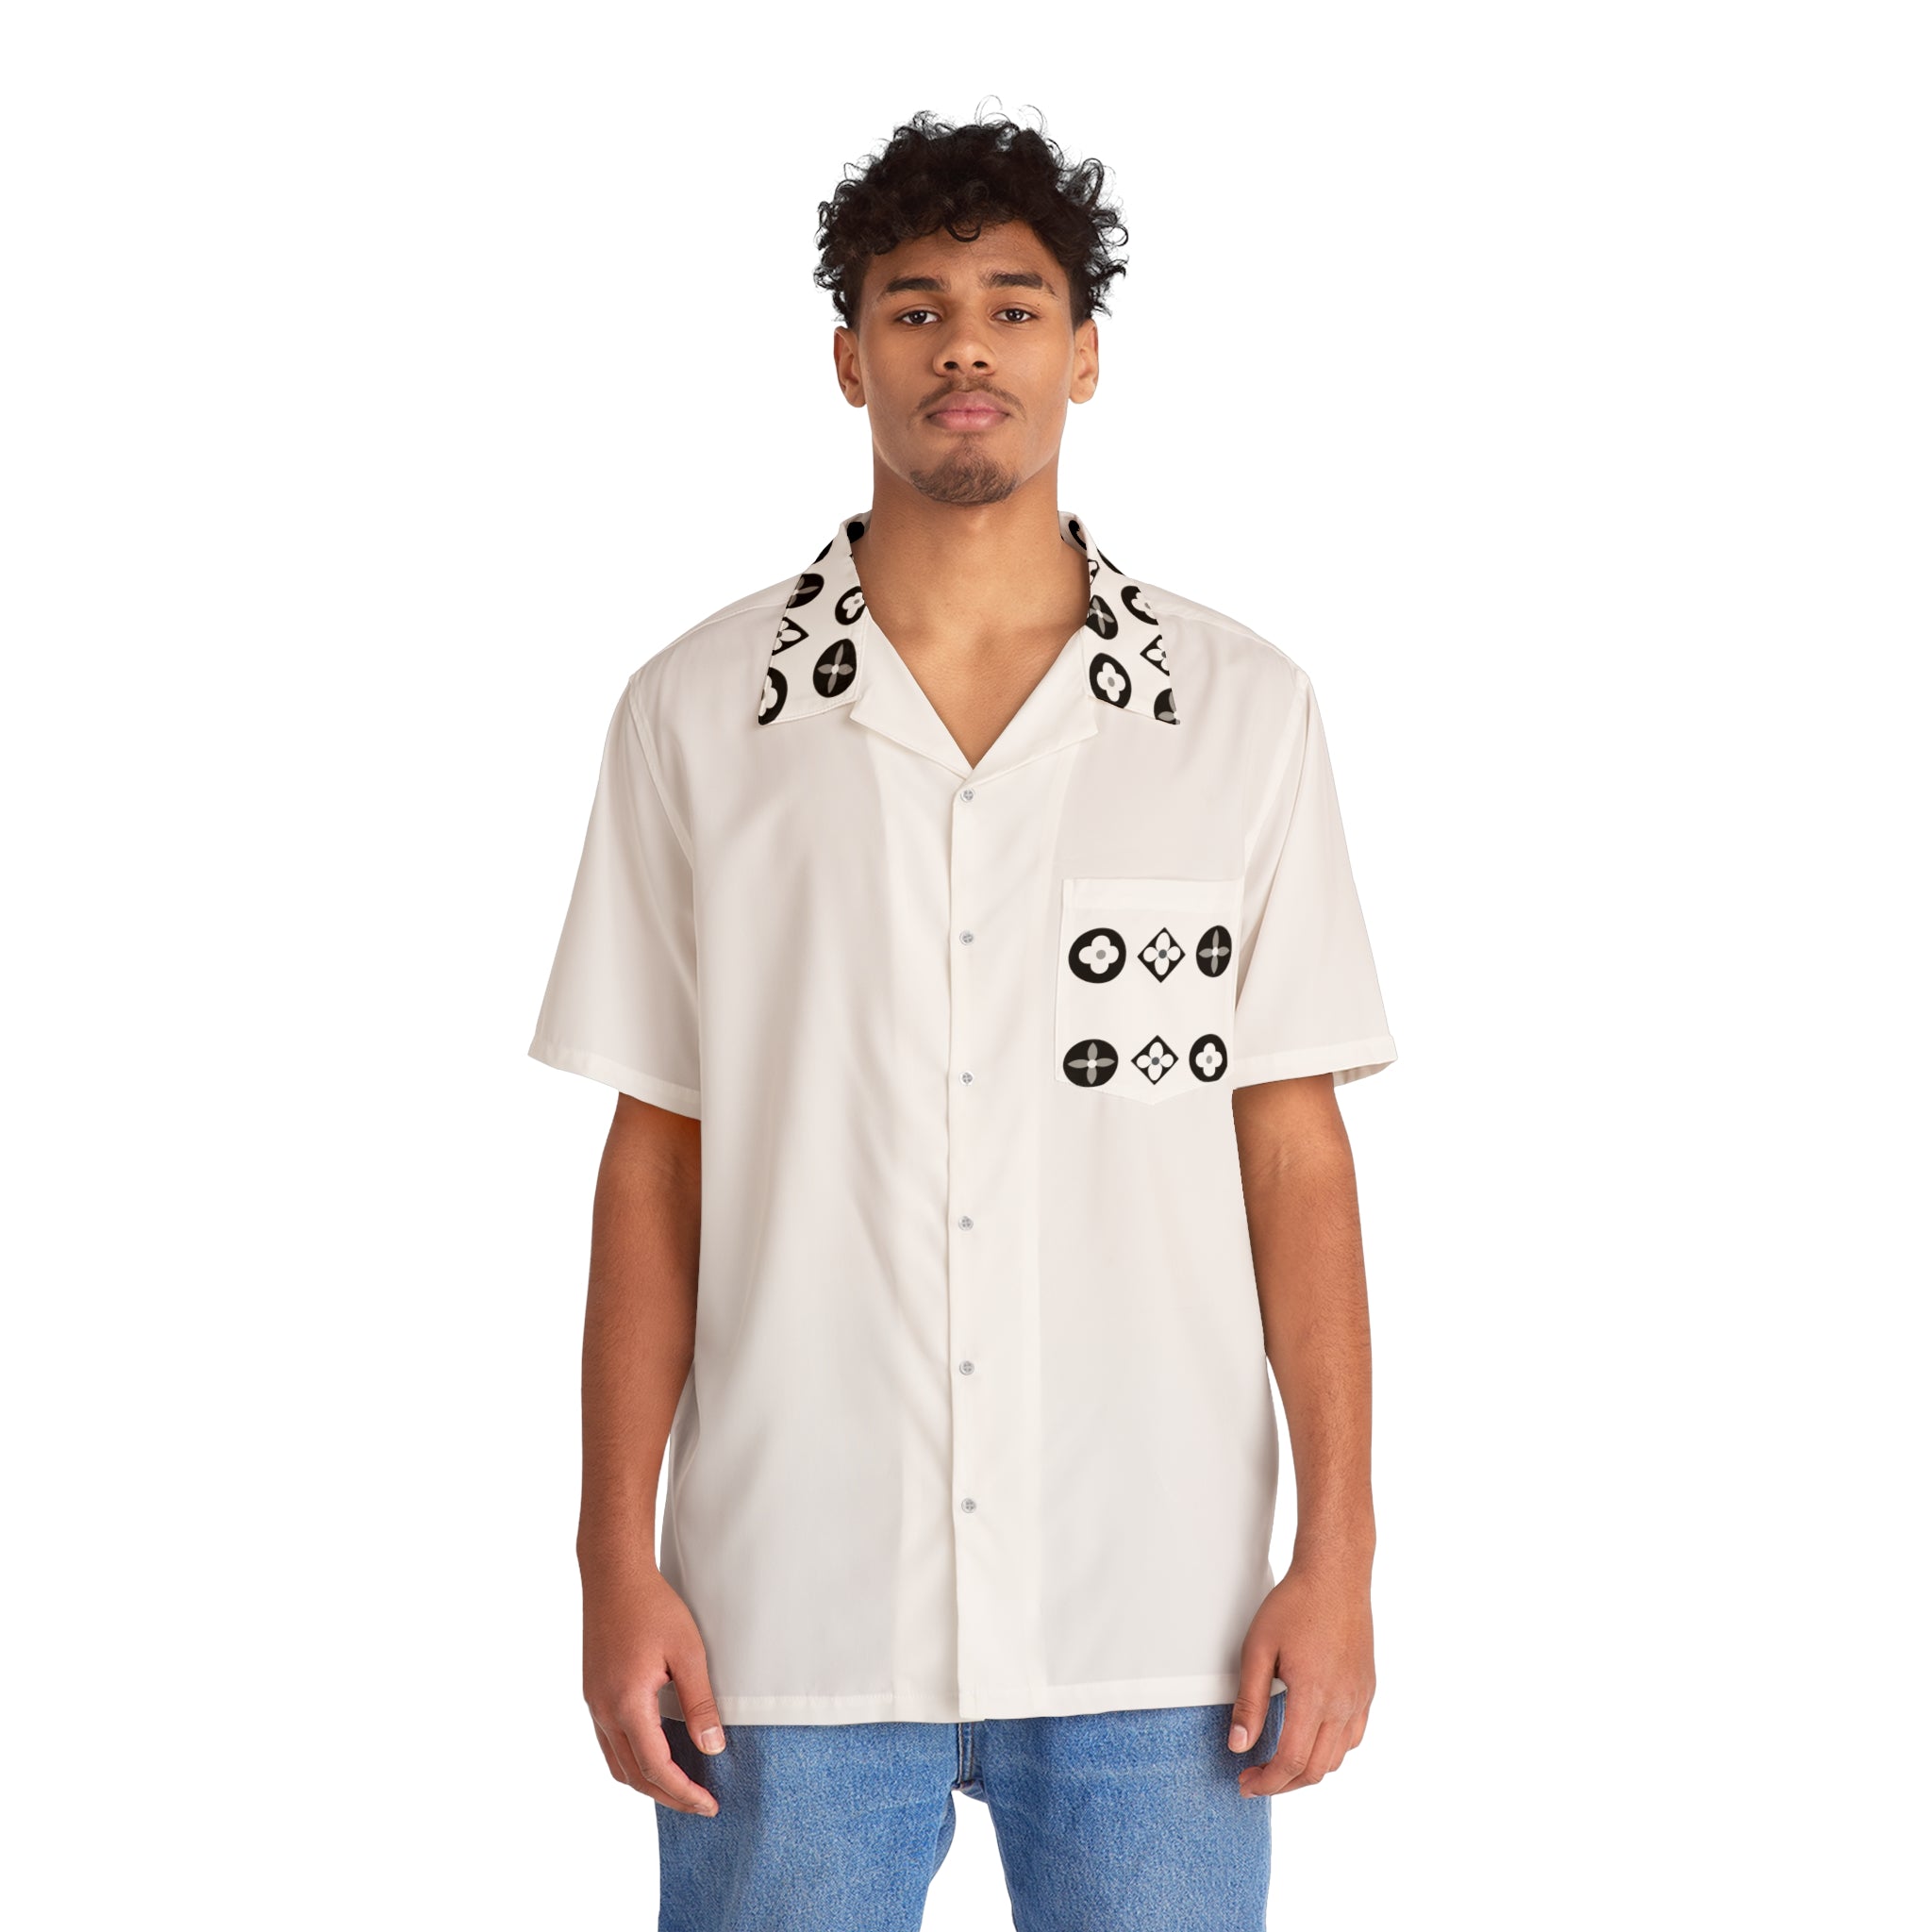  Groove Collection Trilogy of Icons Pocket Grid (Black, White) White Unisex Gender Neutral Button Up Shirt, Hawaiian Shirt Shirts